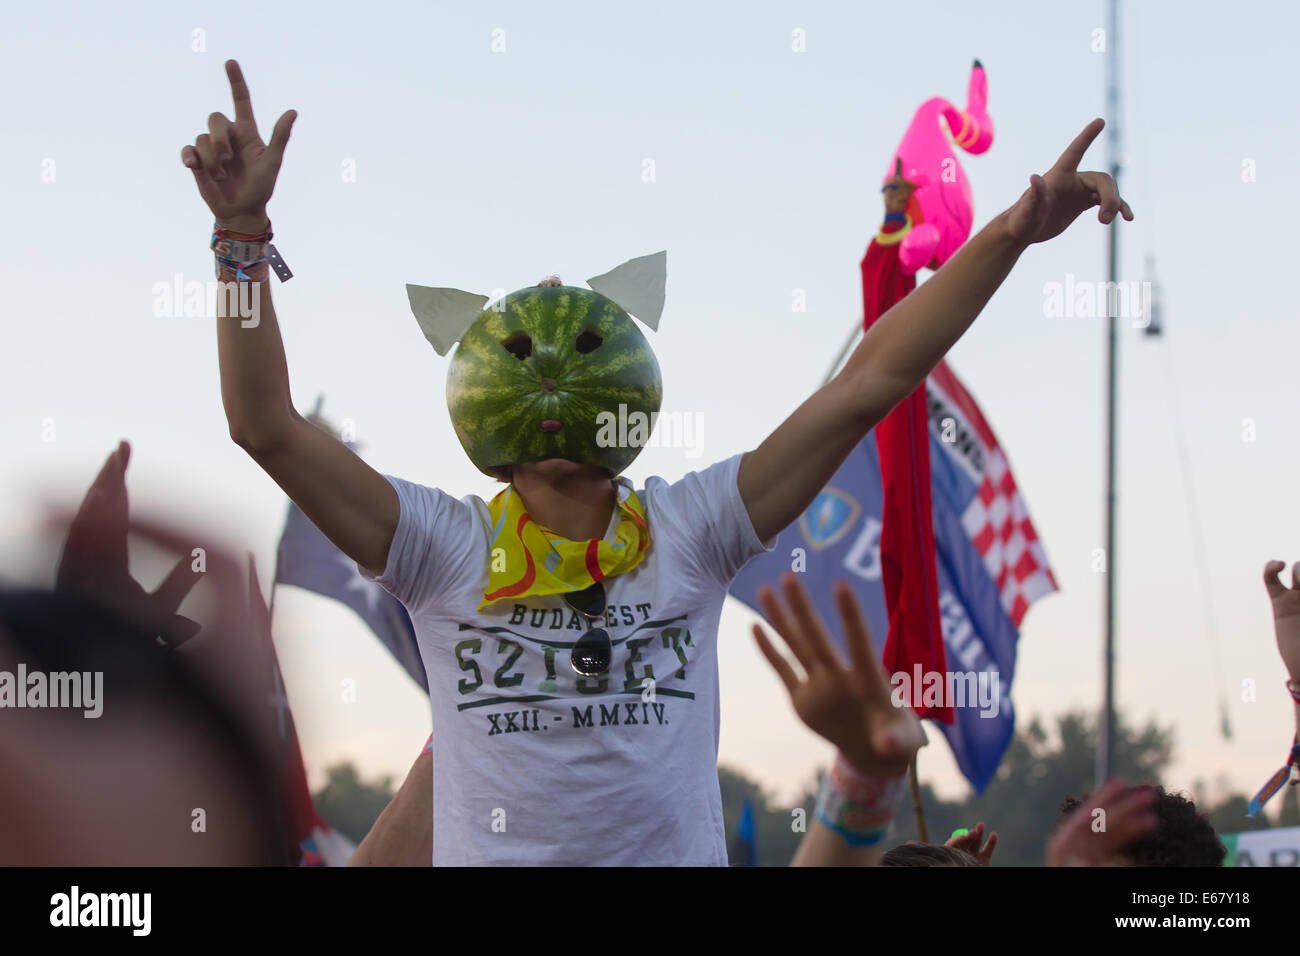 (140817)-- BUDAPEST, August 17, 2014 (Xinhua) -- A music fan takes part in the Sziget (Hungarian for Island) Festival on the Obuda Island in Budapest, Hungary on Aug. 17, 2014. The 22nd Sziget Festival is held from from Aug. 11 to 17. (Xinhua/Attila Volgyi) Stock Photo